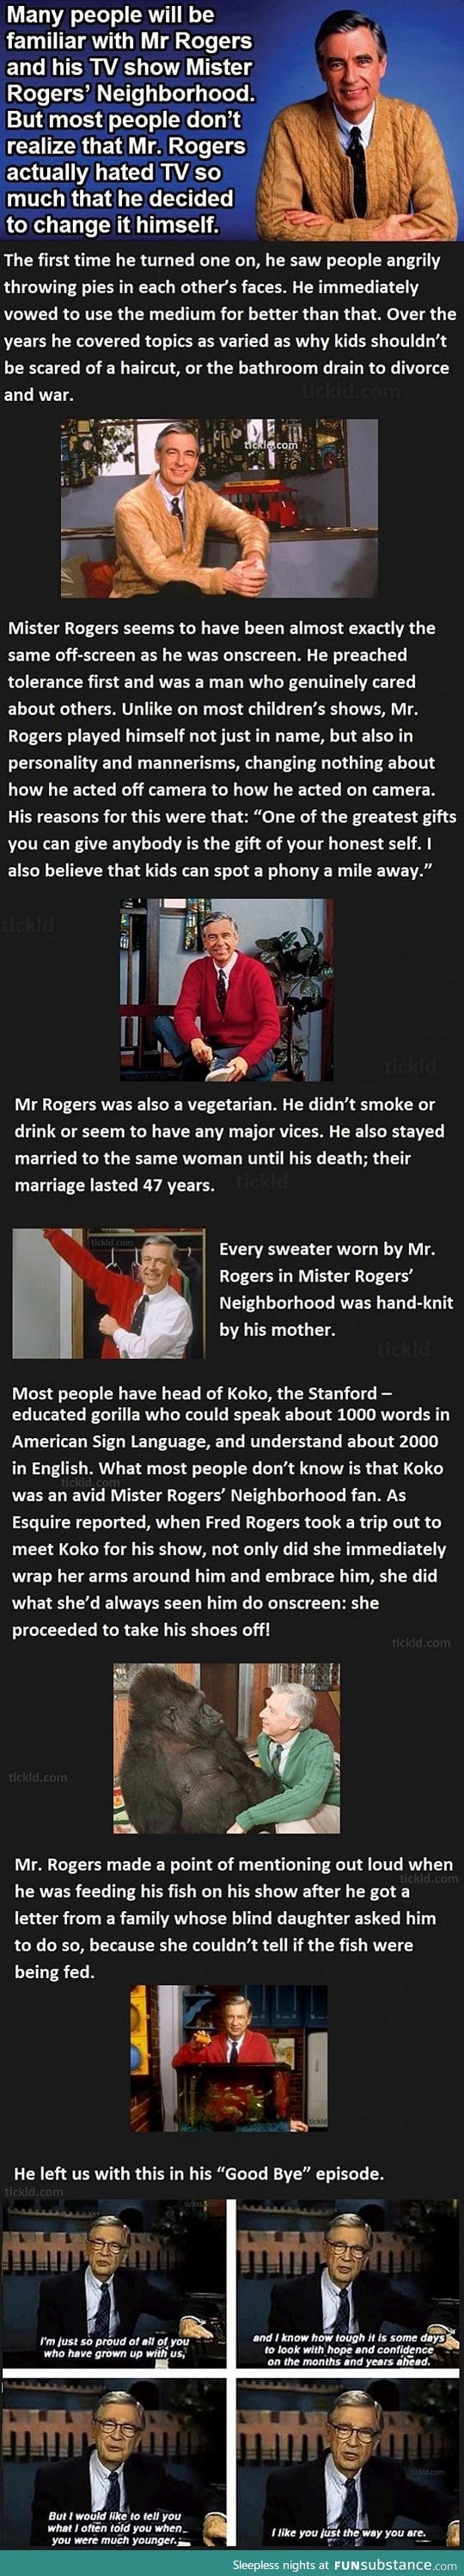 Things you might not know about Mr. Rogers